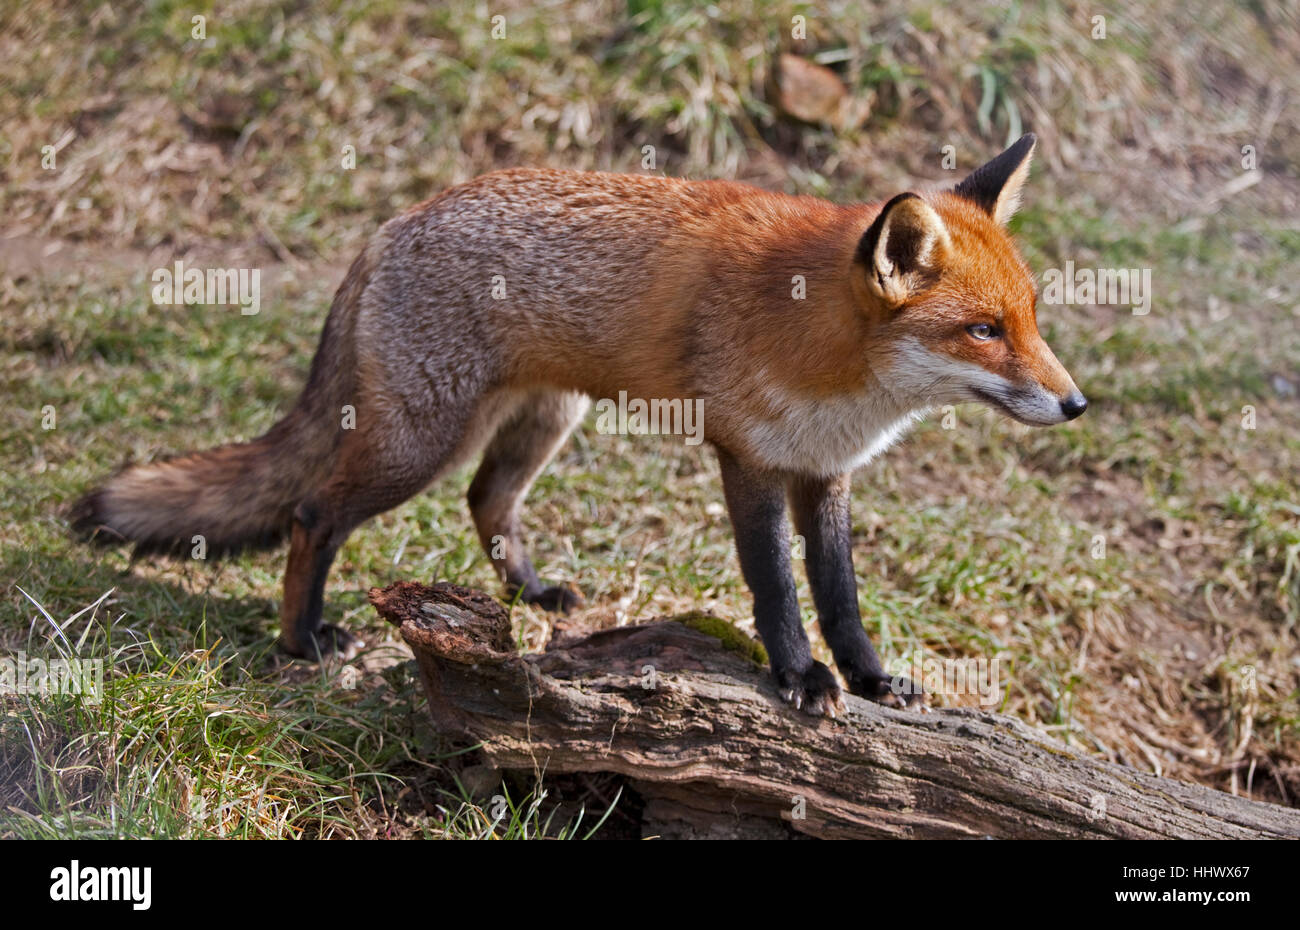 Rosso europeo volpe (vulpes vulpes) Foto Stock